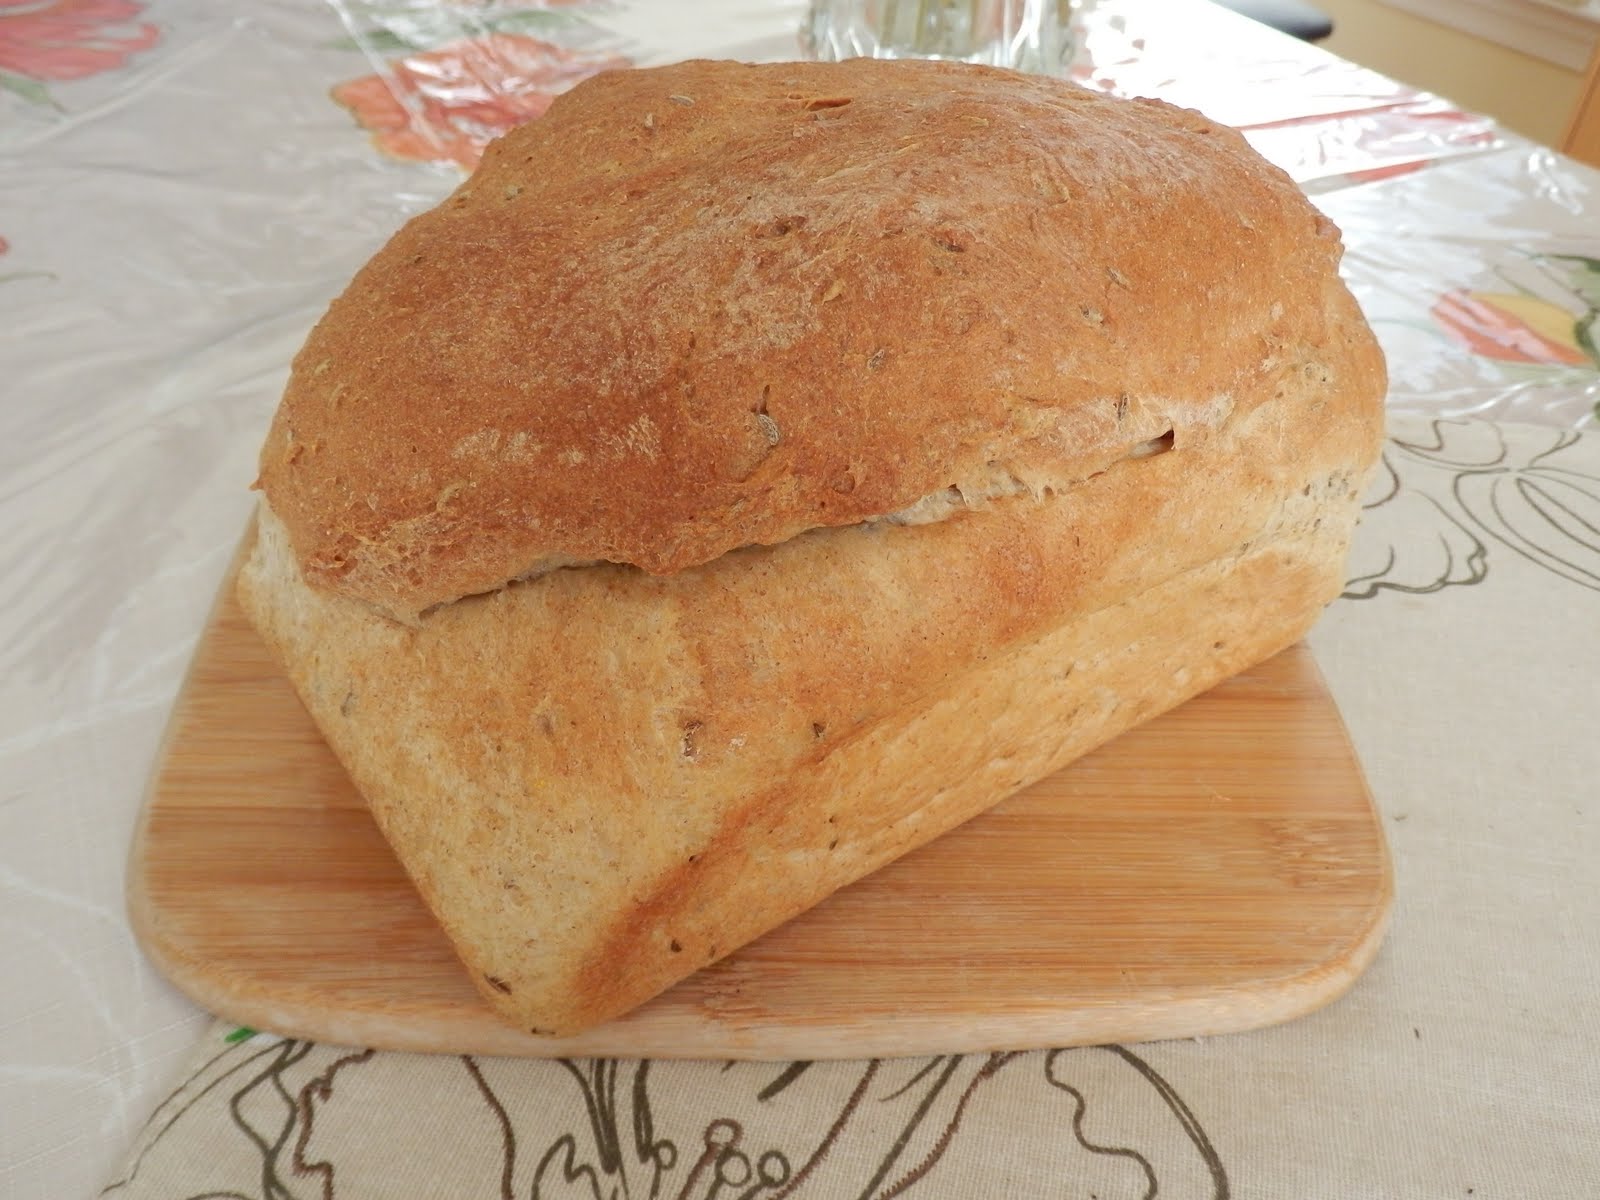 Whats to eat?: Caraway Rye Bread